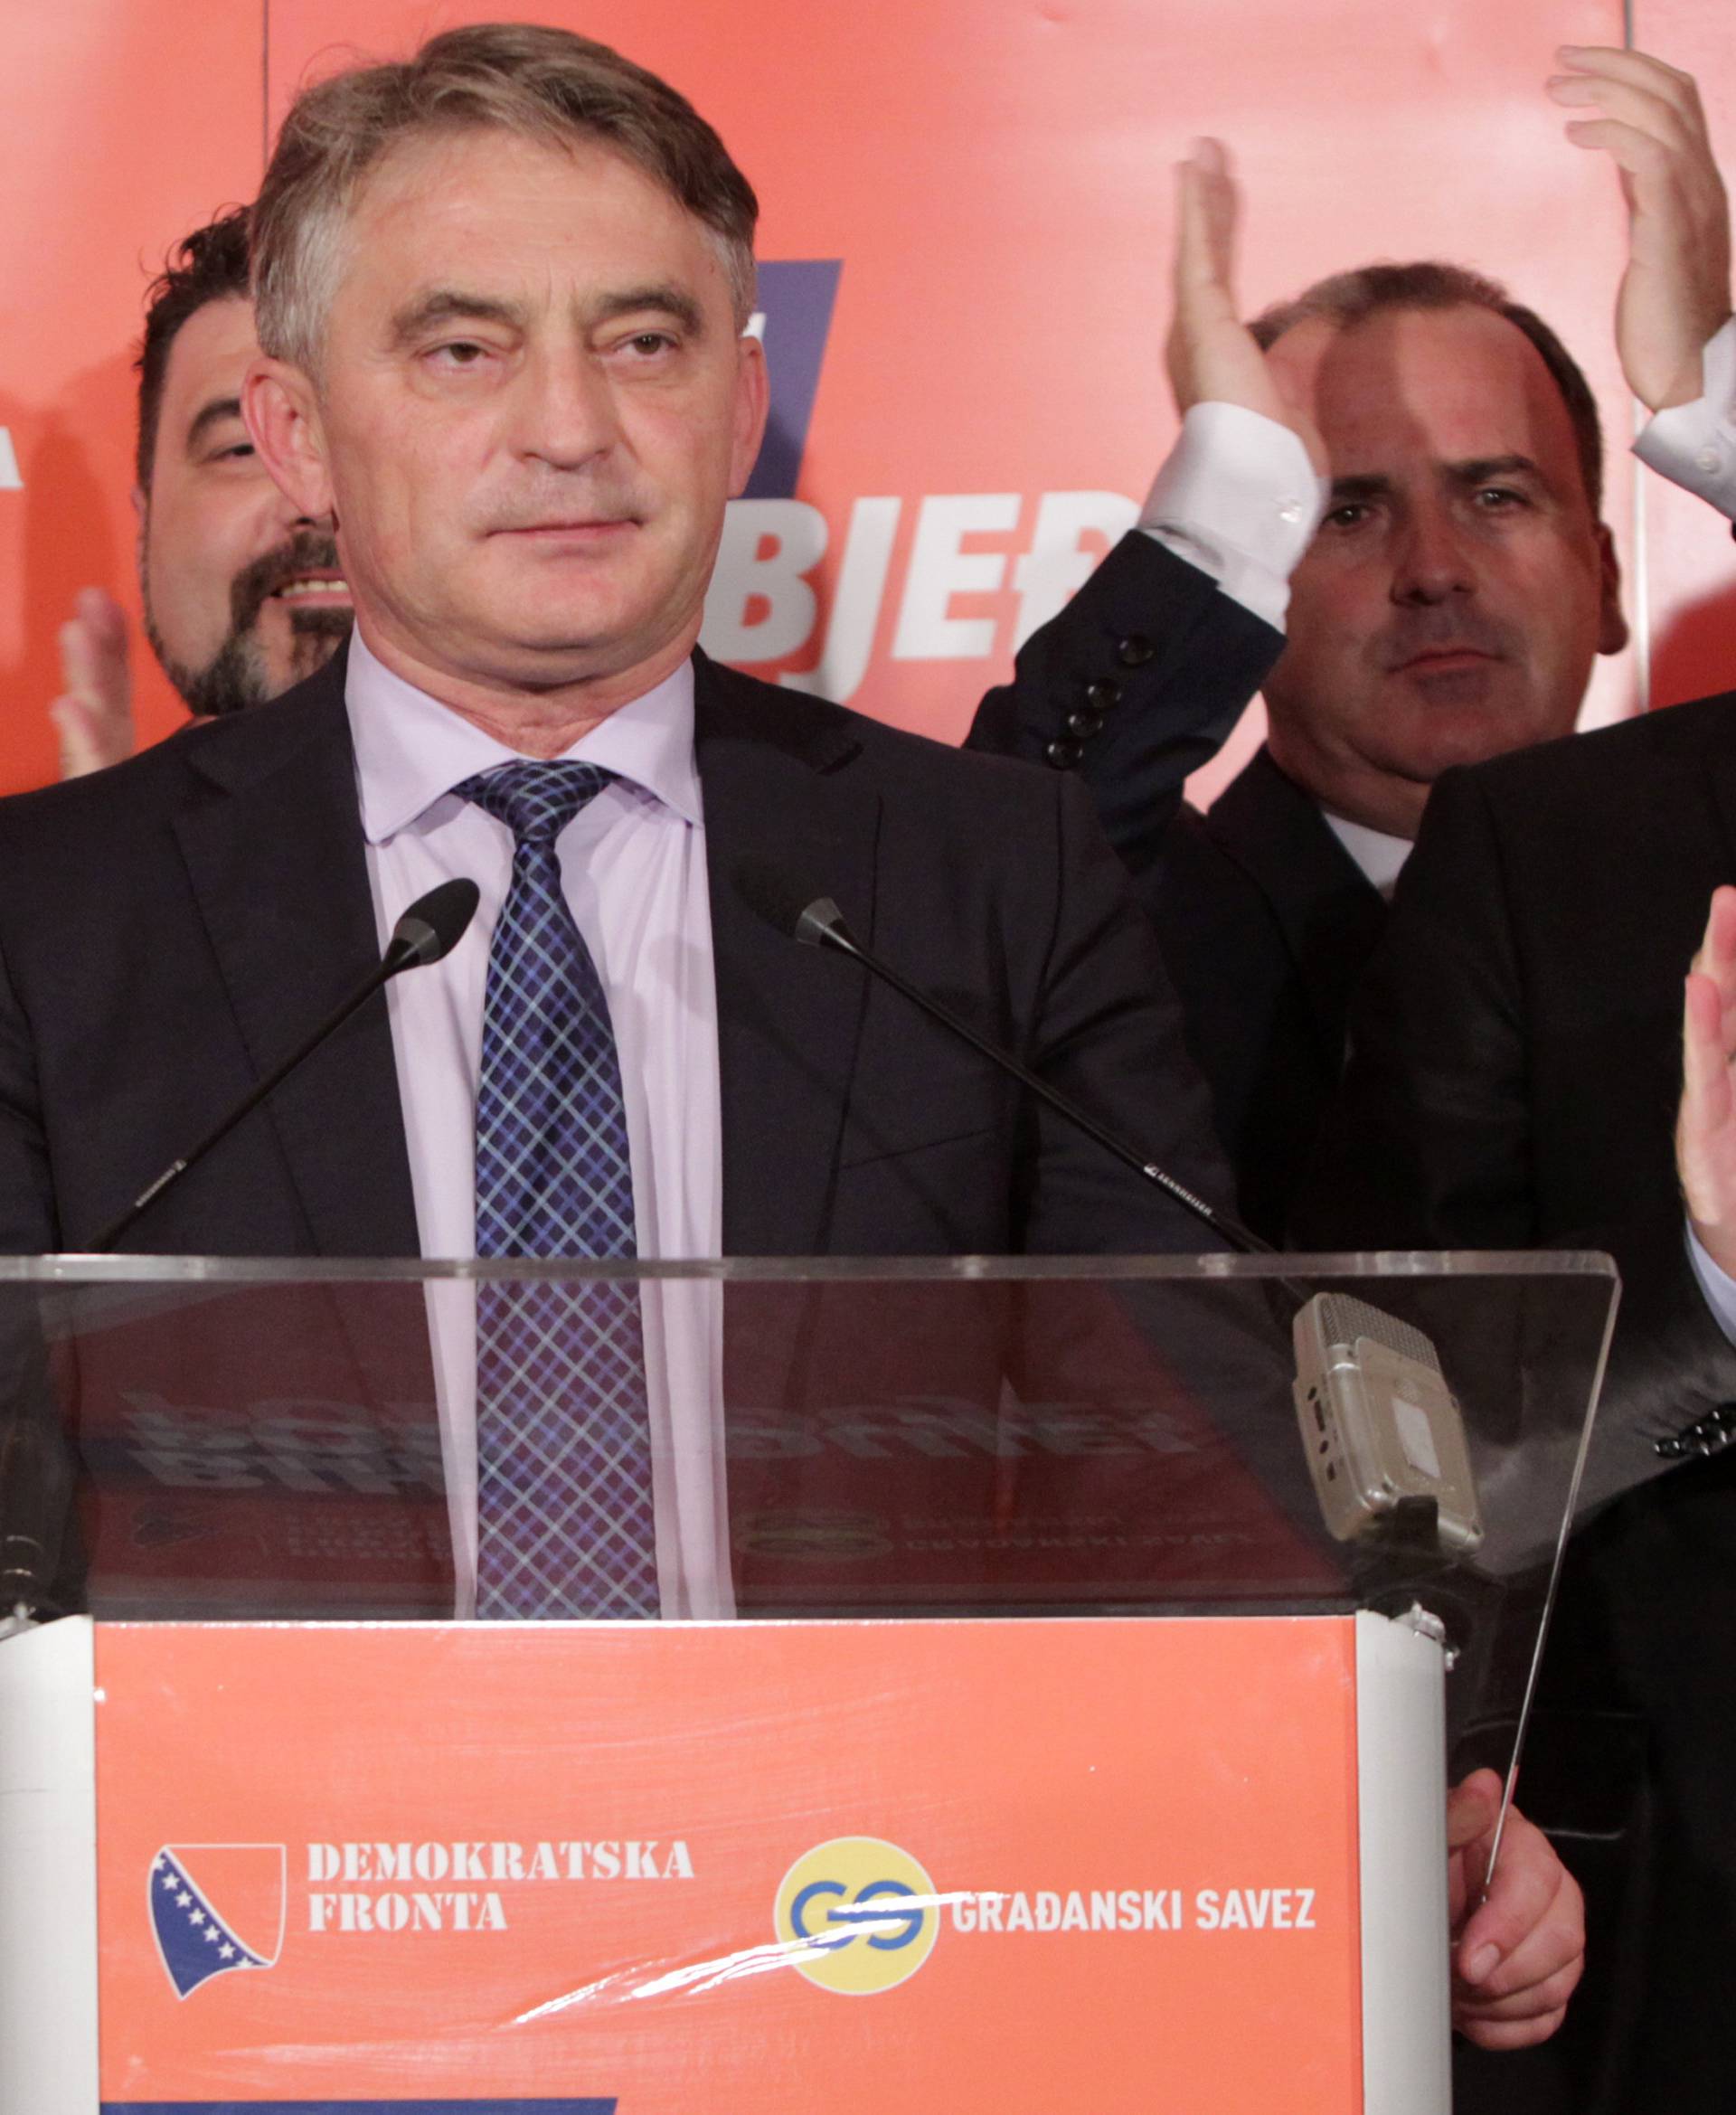 Zeljko Komsic, Democratic Front (DF) attends a news conference where he declared himself the winner of the Croat seat of the Tri-partite Bosnian Presidency in Sarajevo